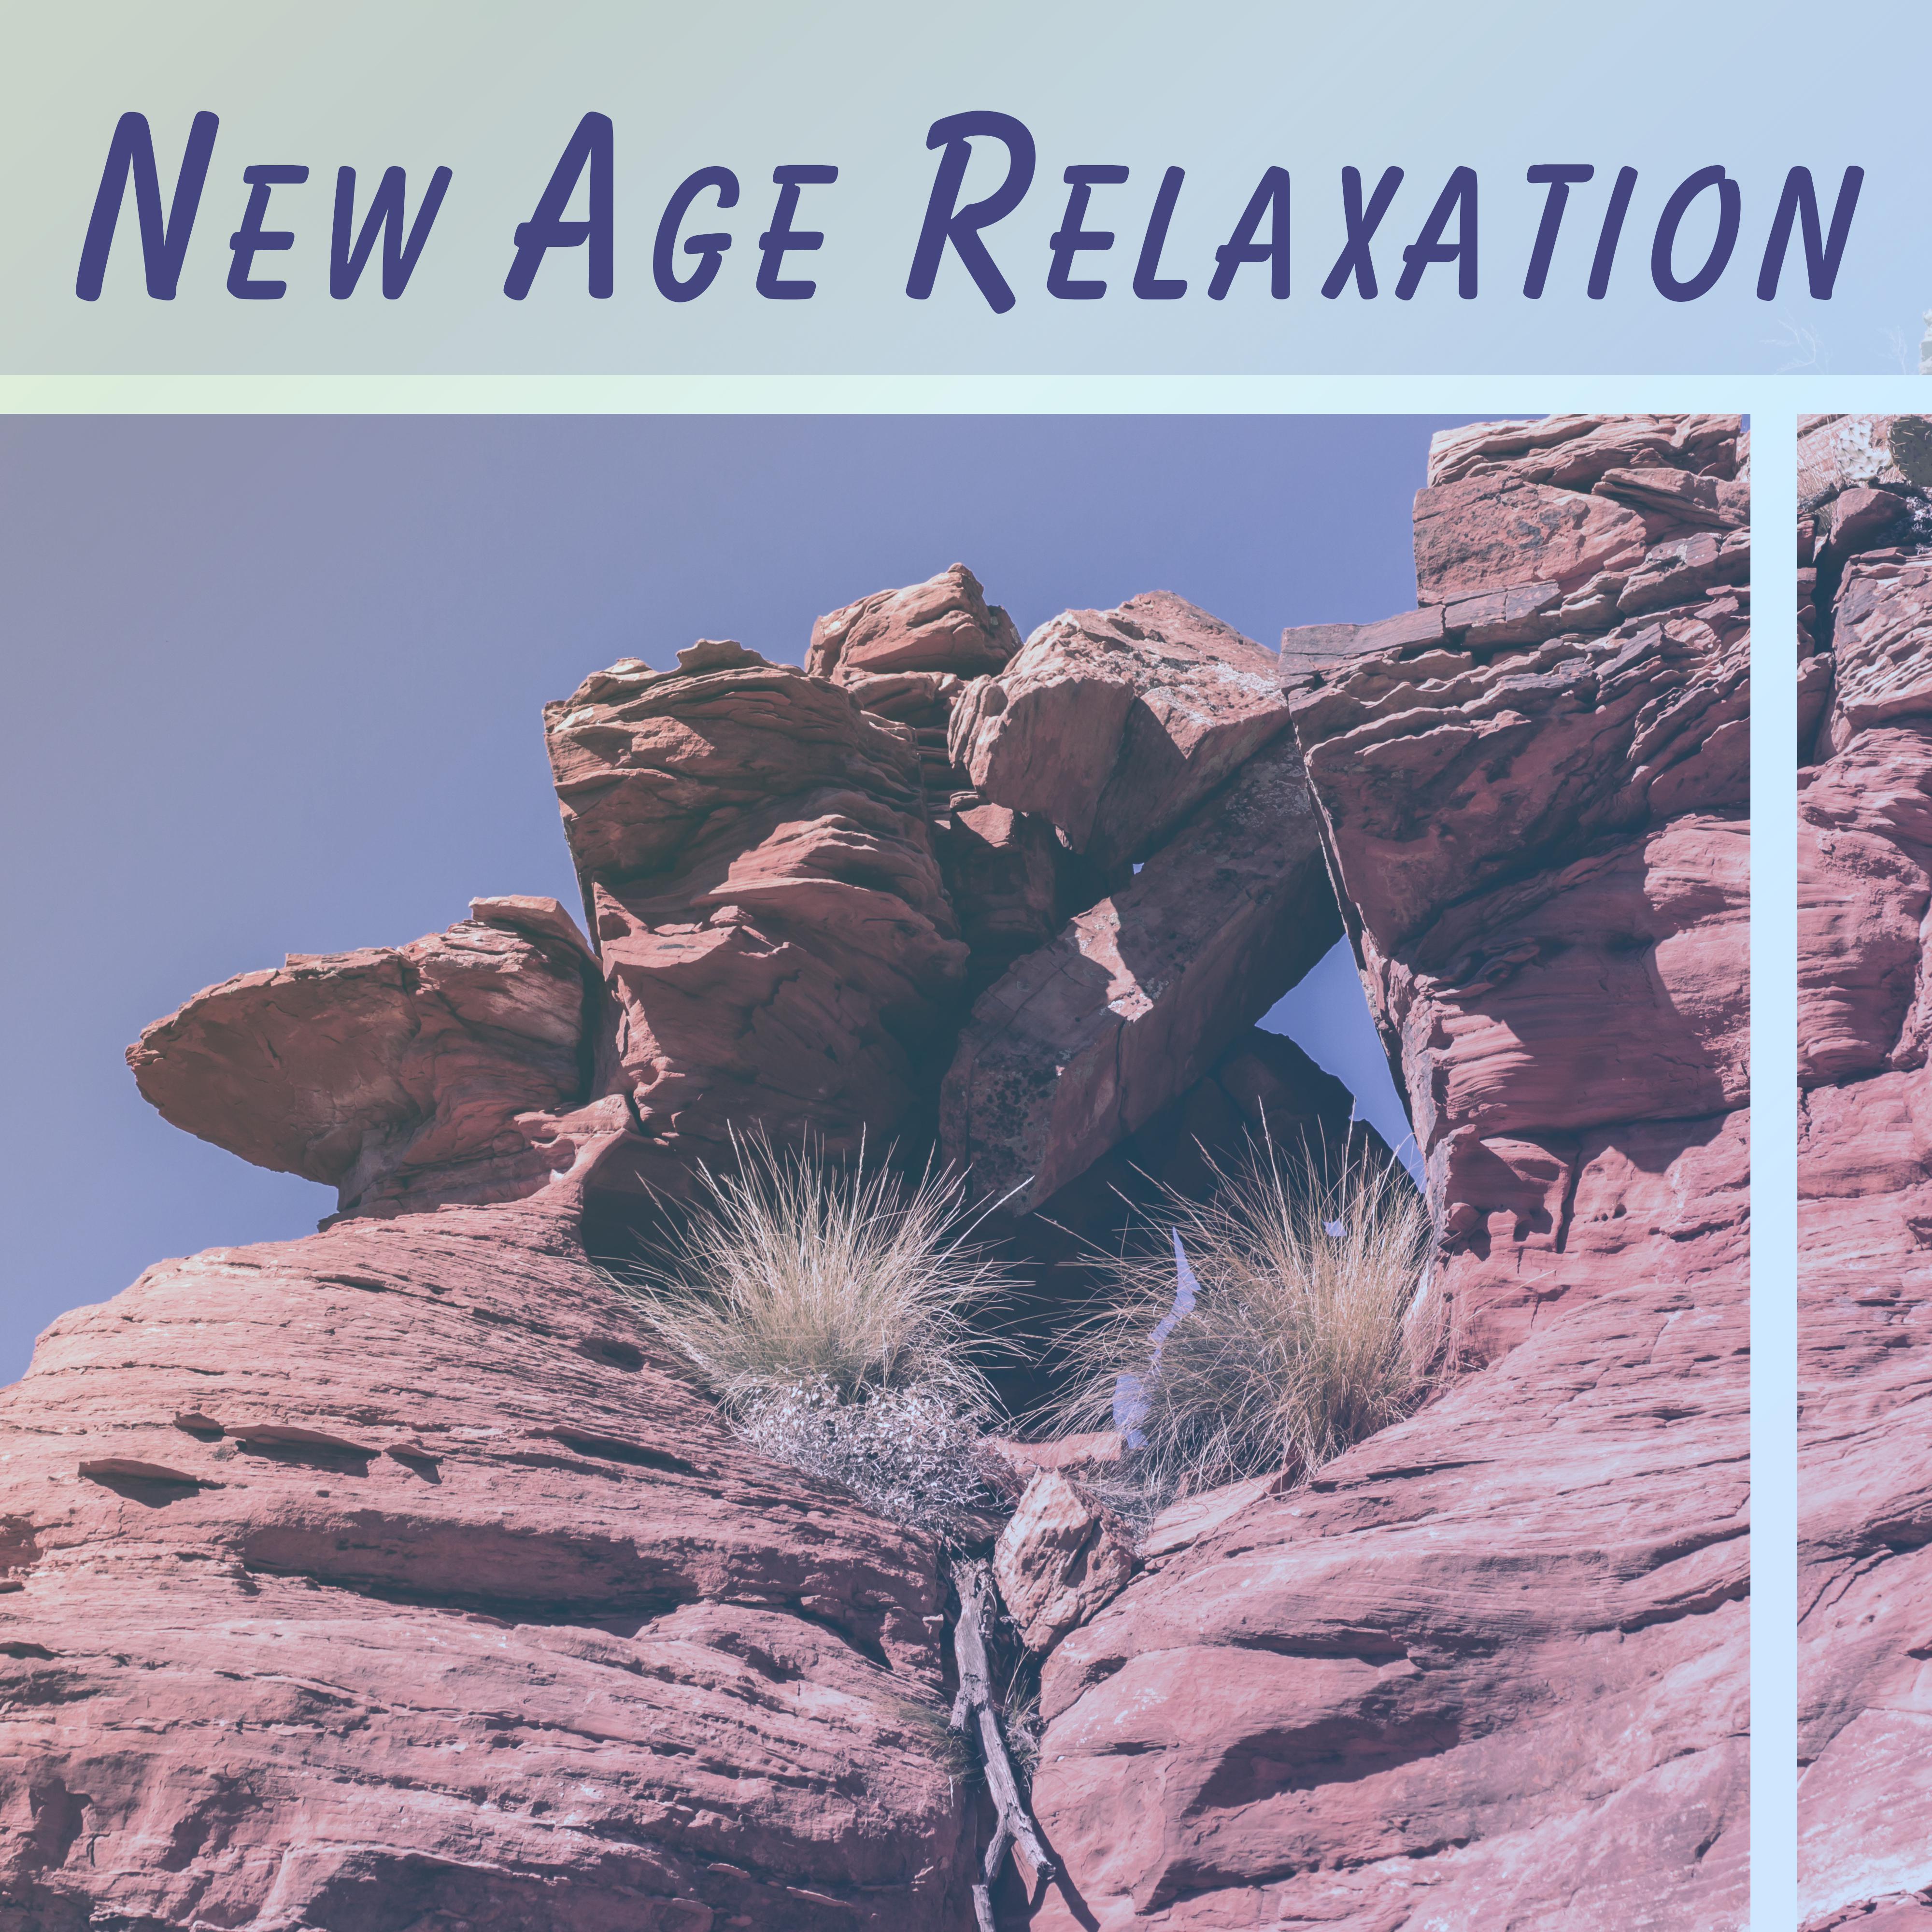 New Age Relaxation  Nature Sounds to Rest, Stress Relief, Forest Music, Sounds of Birds, Peaceful Music for Relax, Deep Sleep